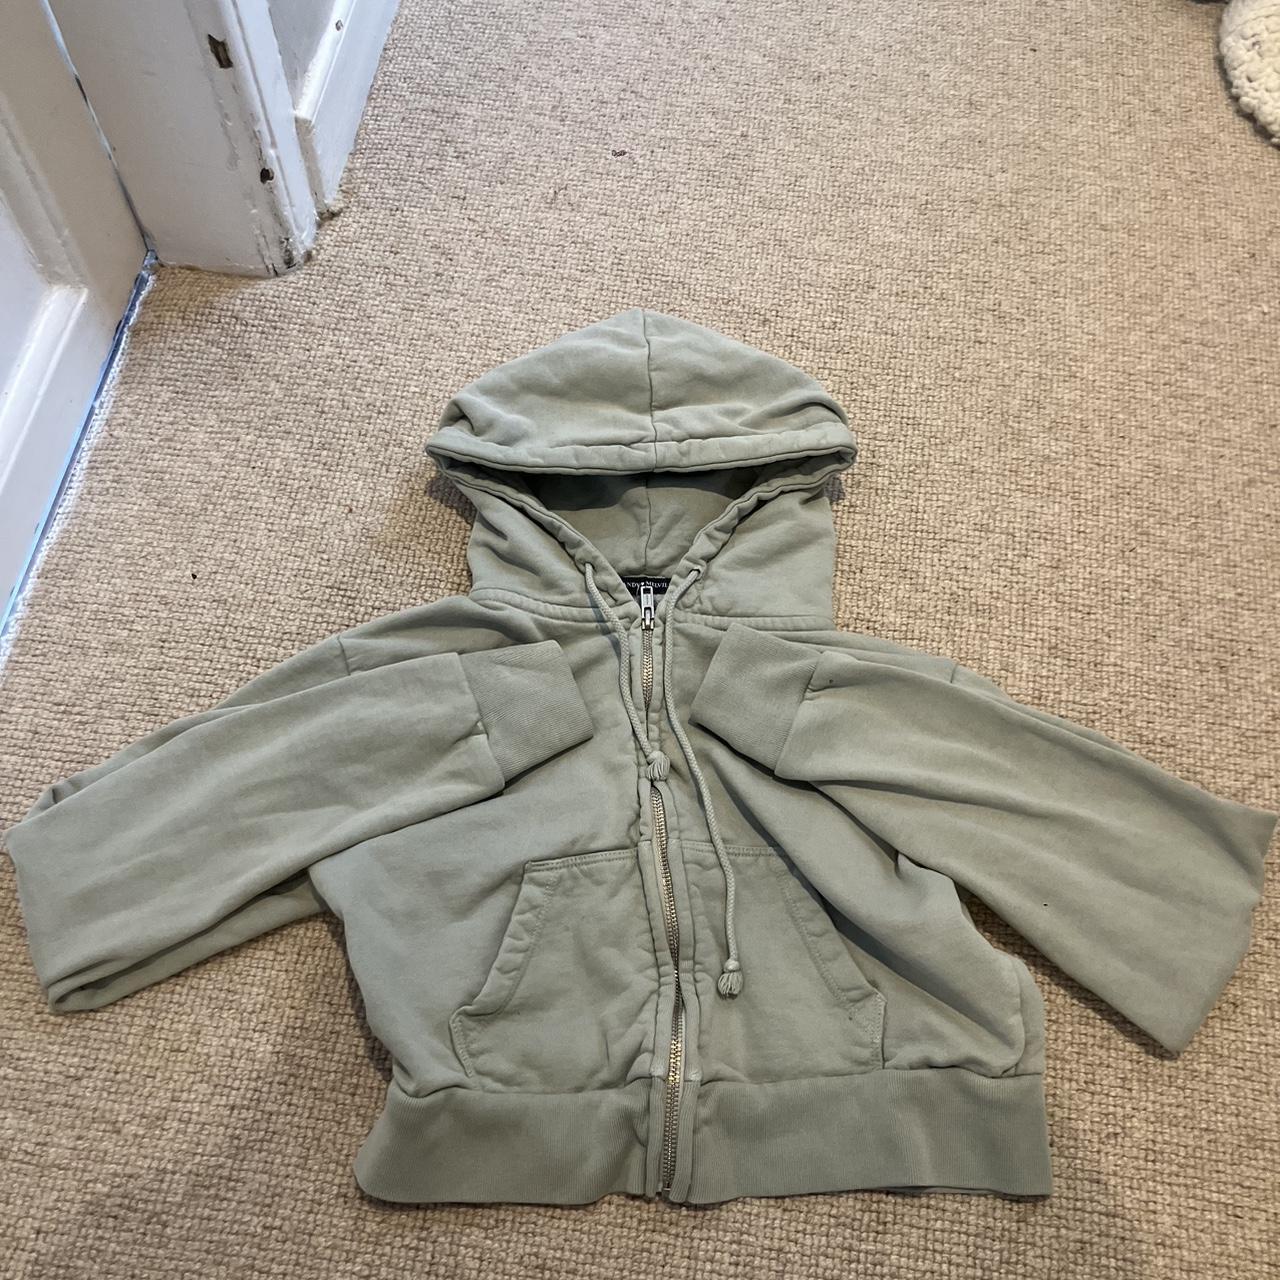 Small Brandy zip up hoodie Tiny stain but not - Depop